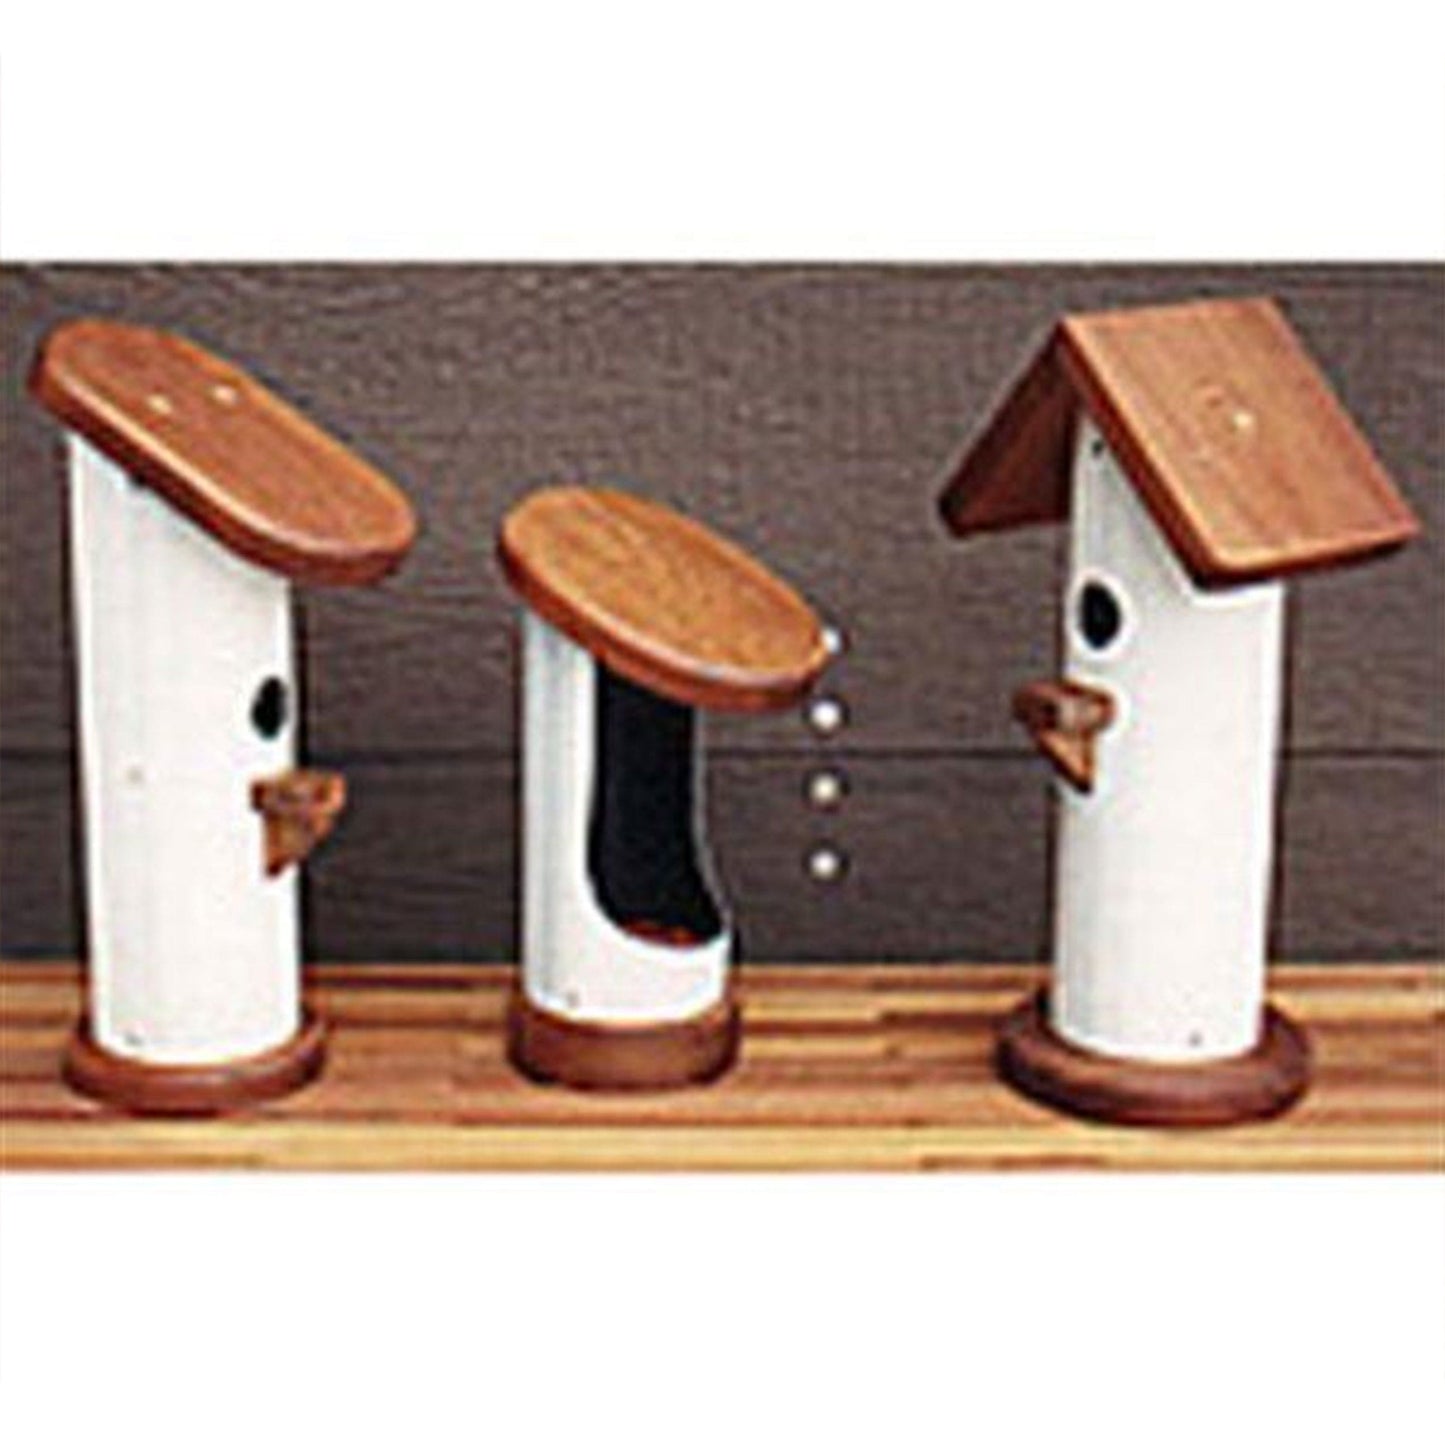 Woodworking Project Paper Plan to Build PVC Bird Houses alt 0